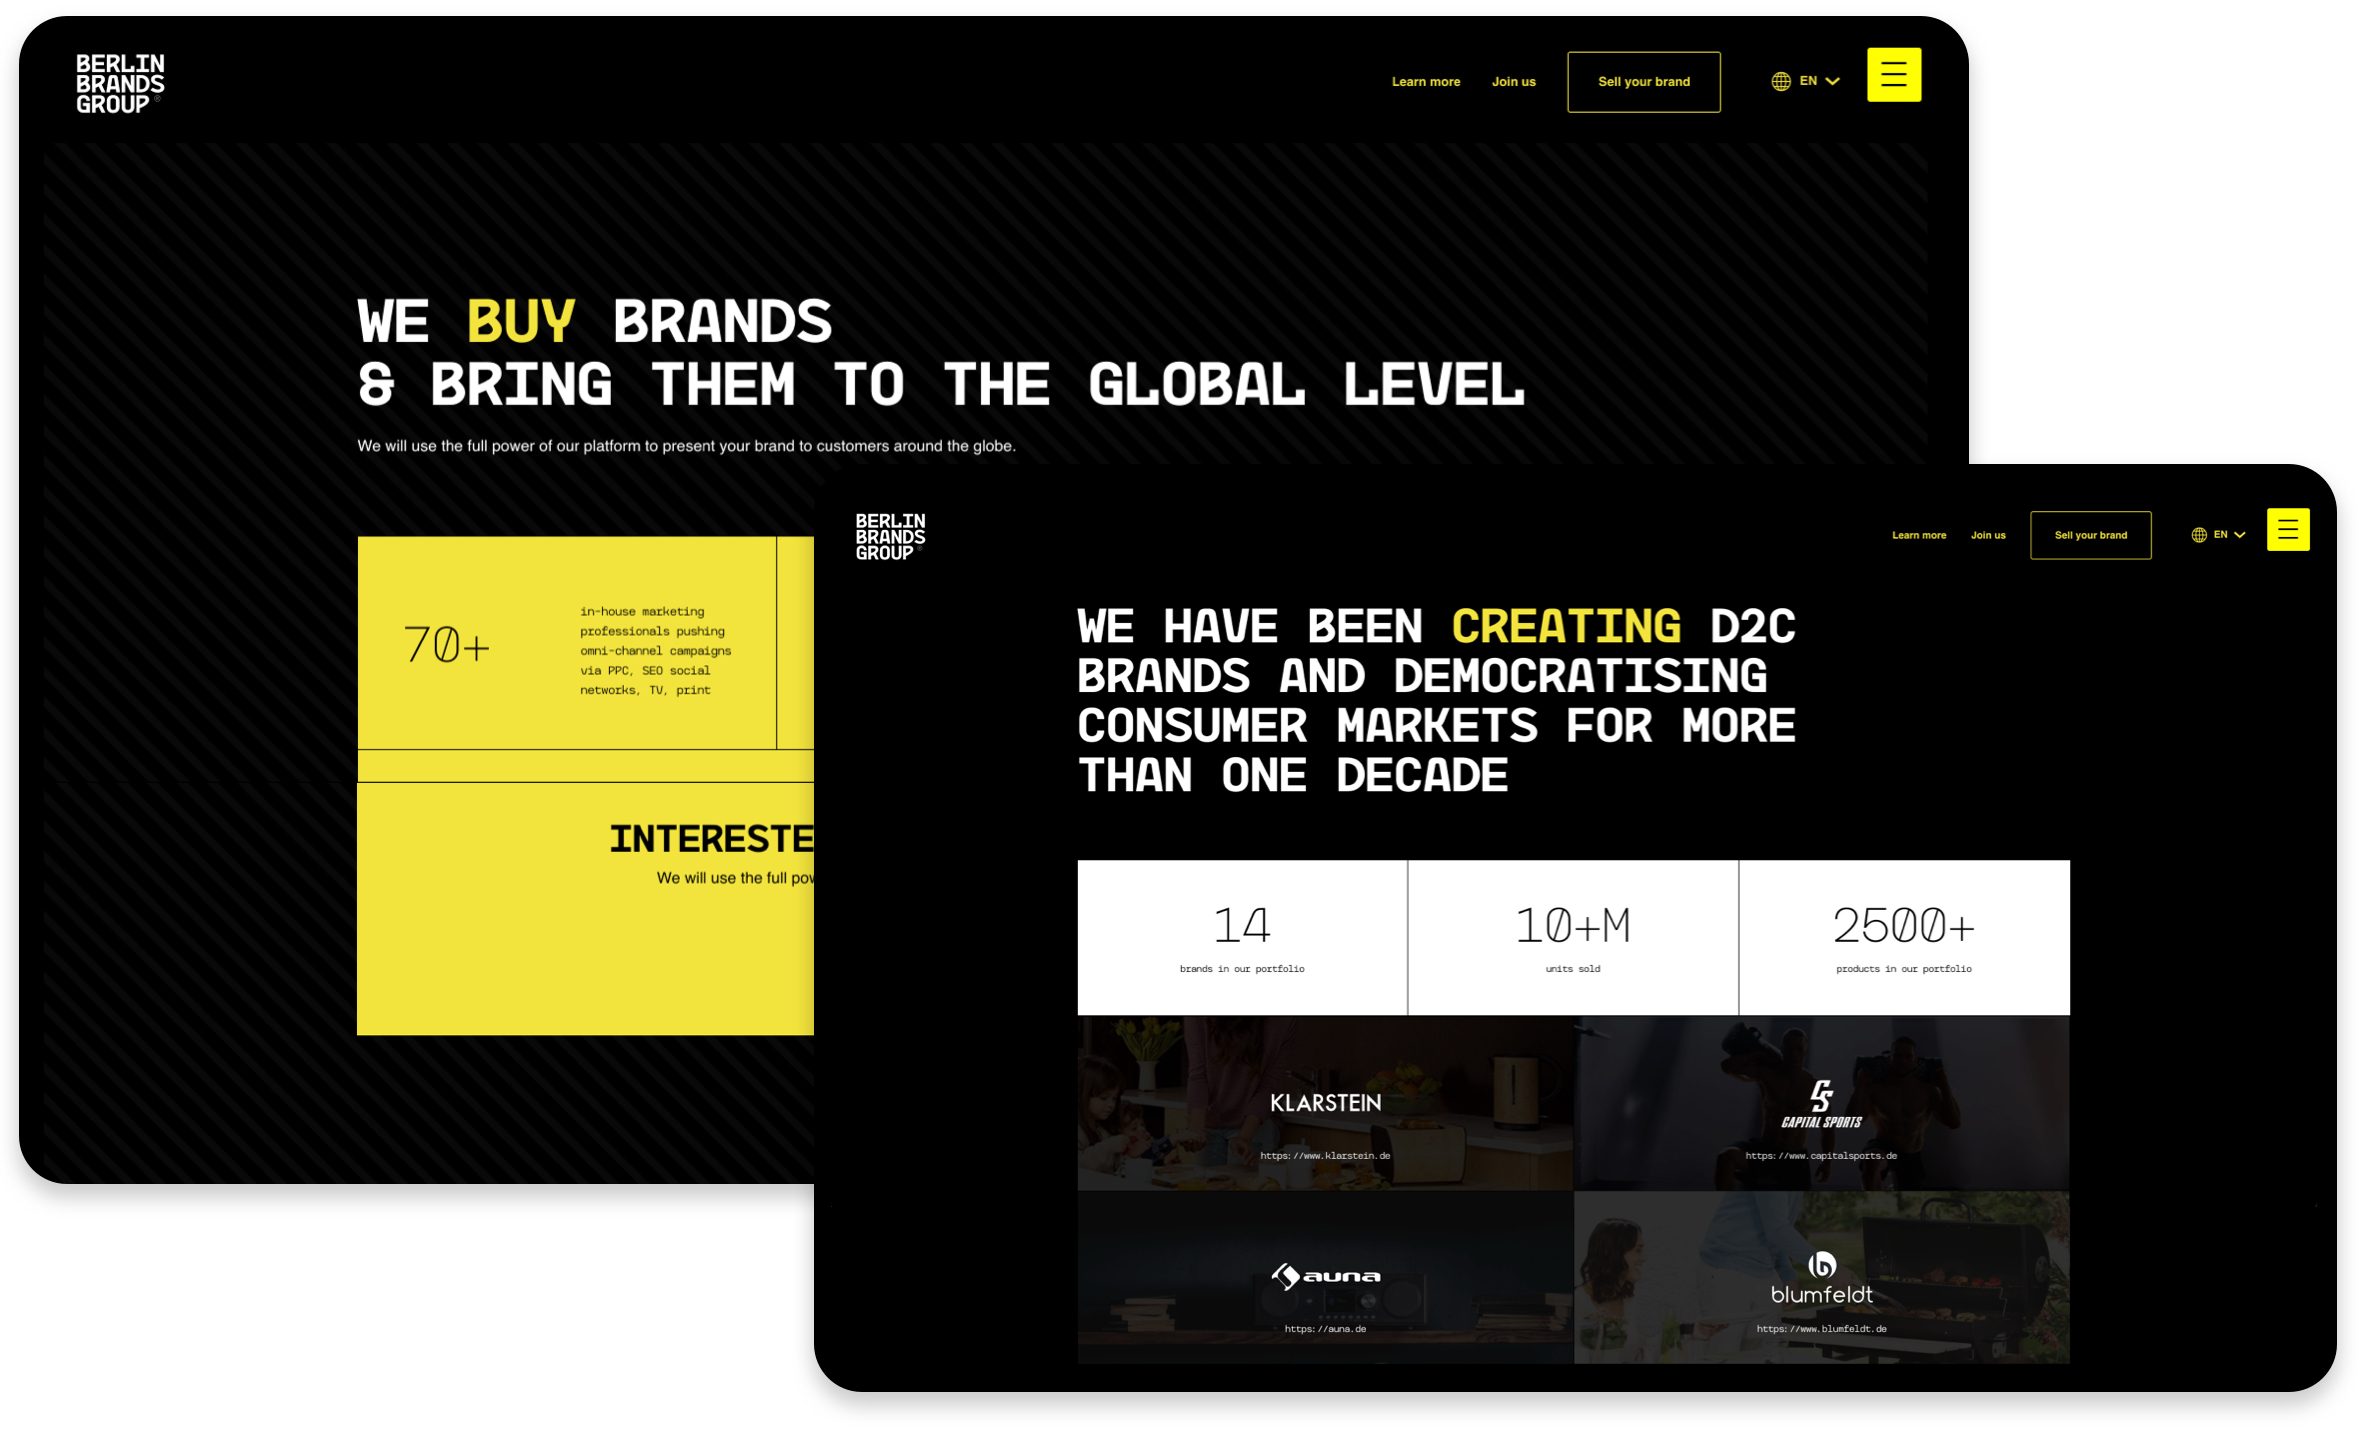 BBG's best-of-breed commerce architecture allows them to tailor each of their brands' web presences according to their style and context